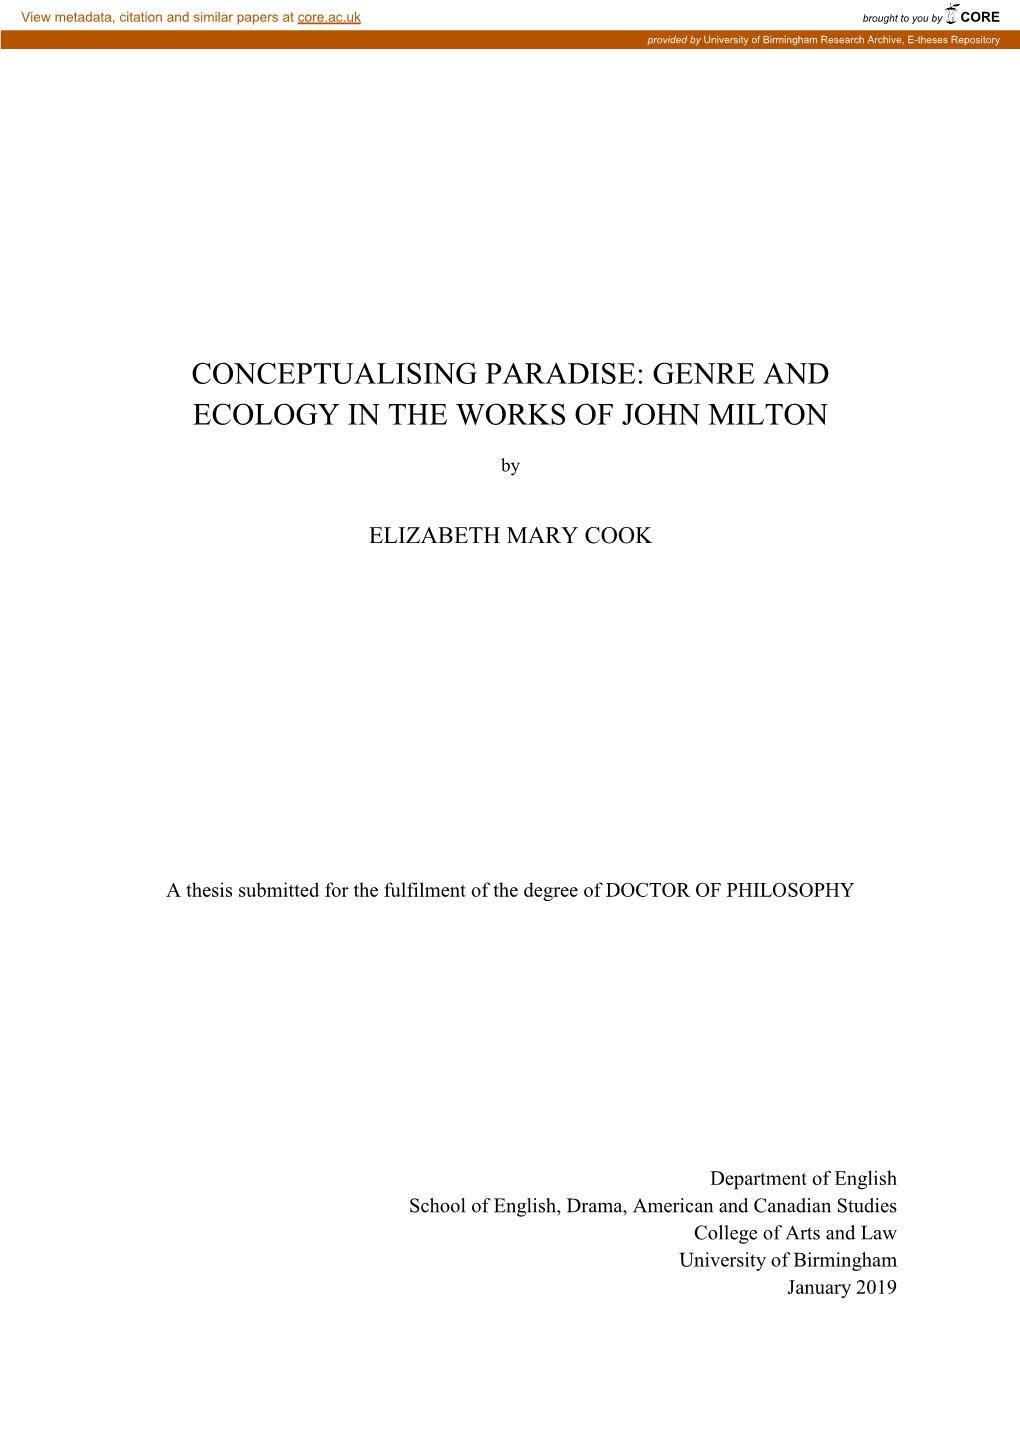 Conceptualising Paradise: Genre and Ecology in the Works of John Milton